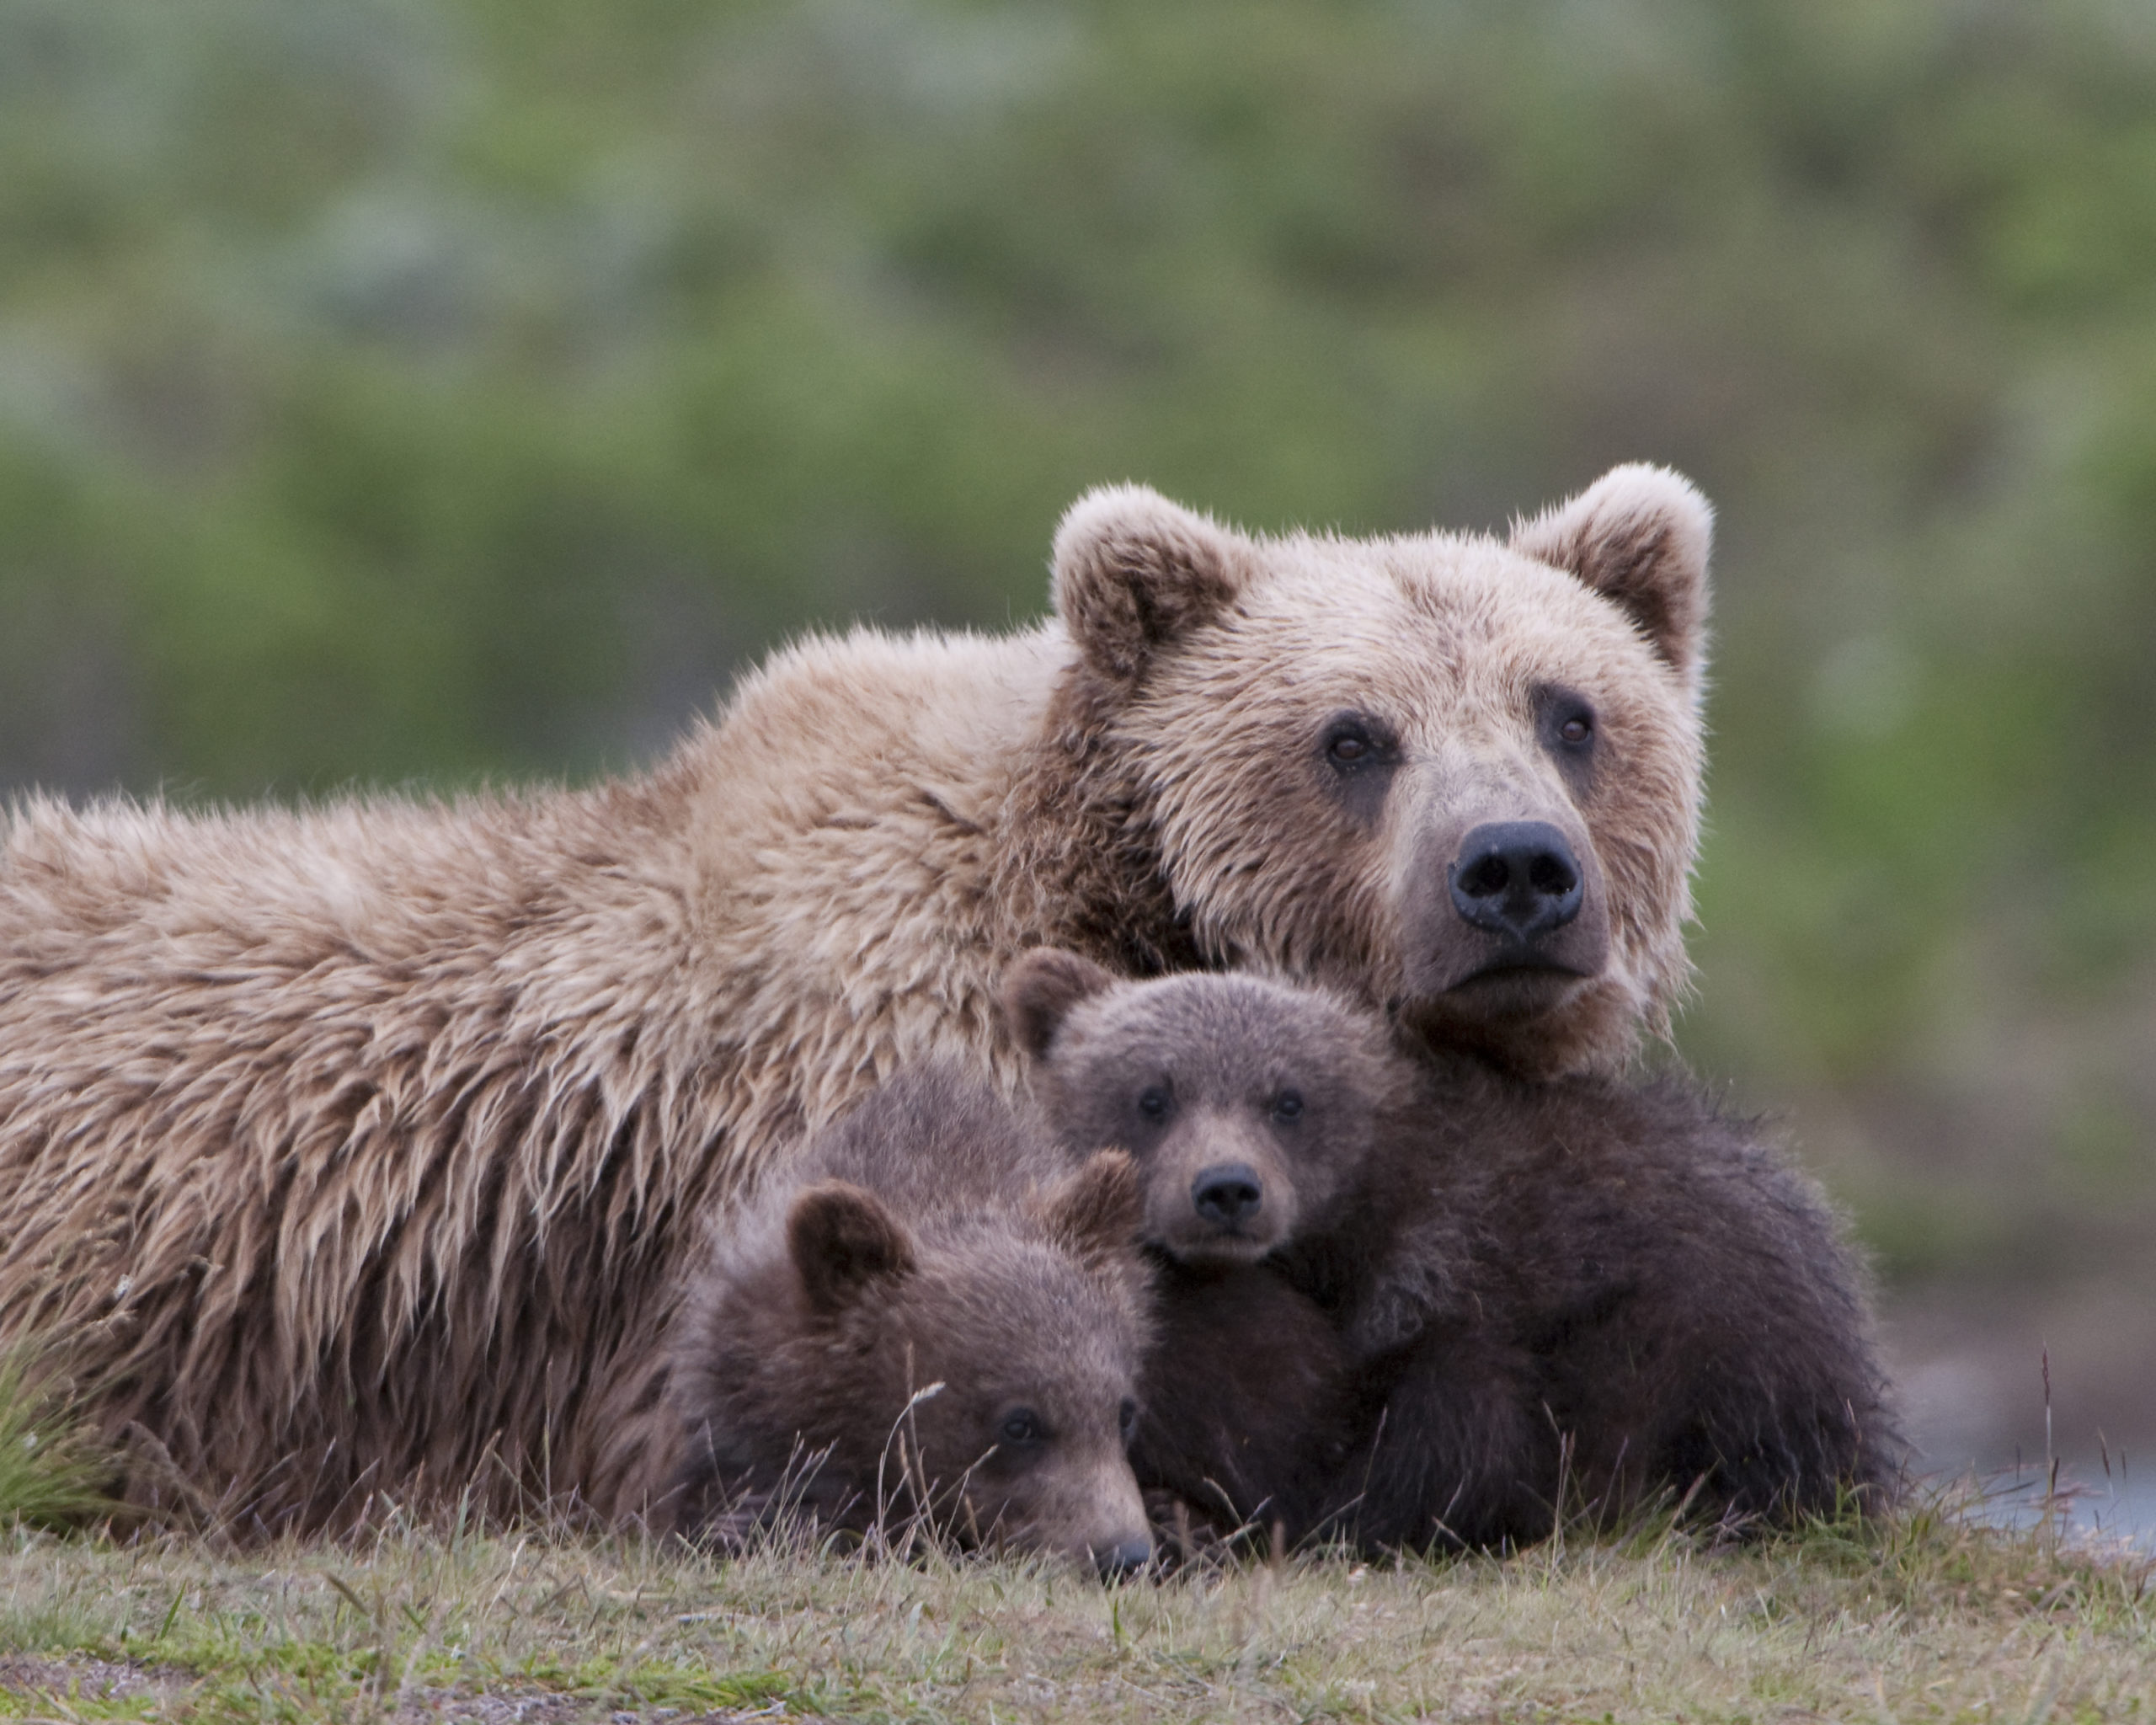 Wildlife Advocates Applaud Restart of Process to Potentially Return Grizzly Bears to North Cascades 